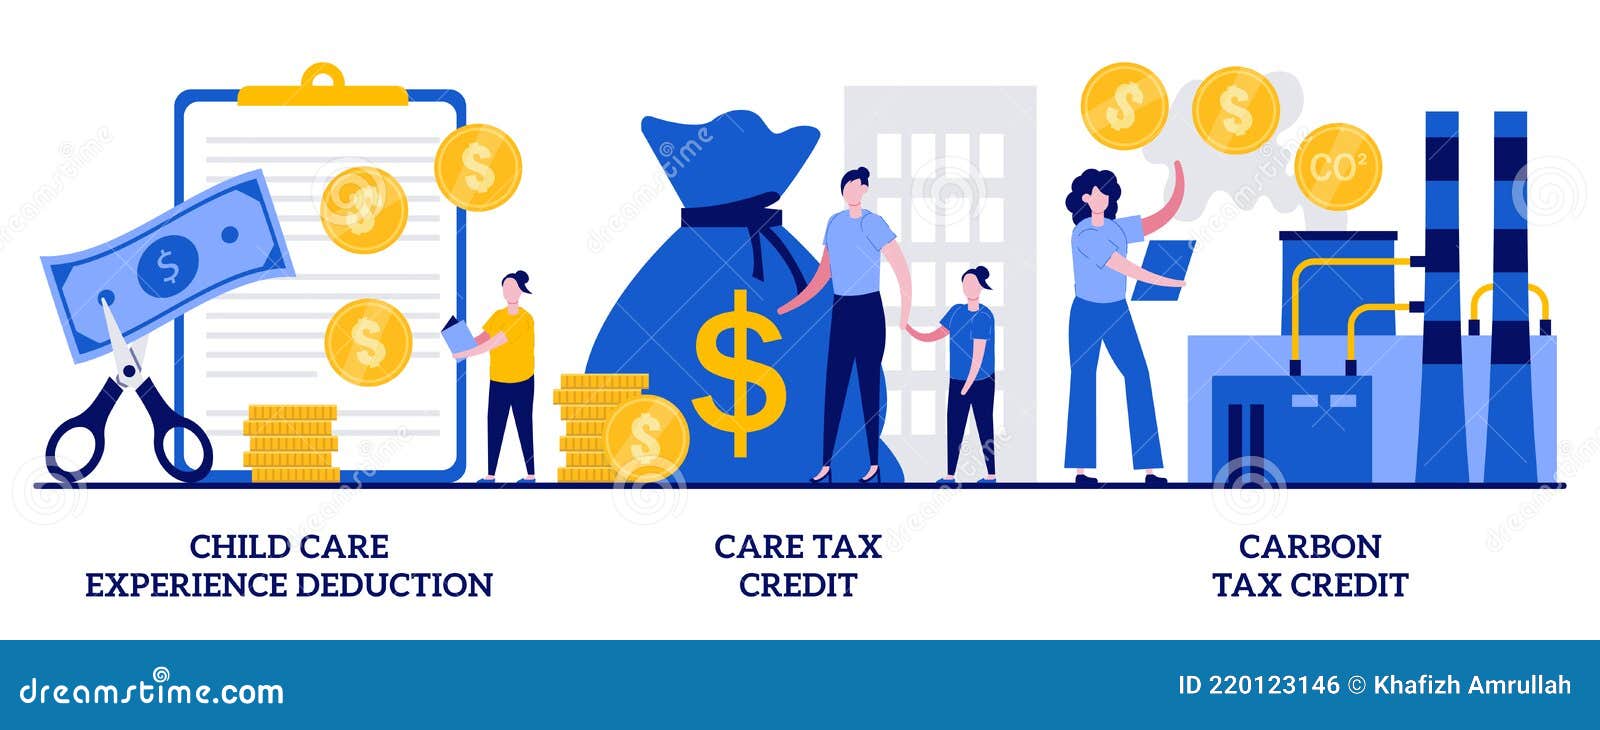 child-care-experience-deduction-care-tax-credit-carbon-tax-credit